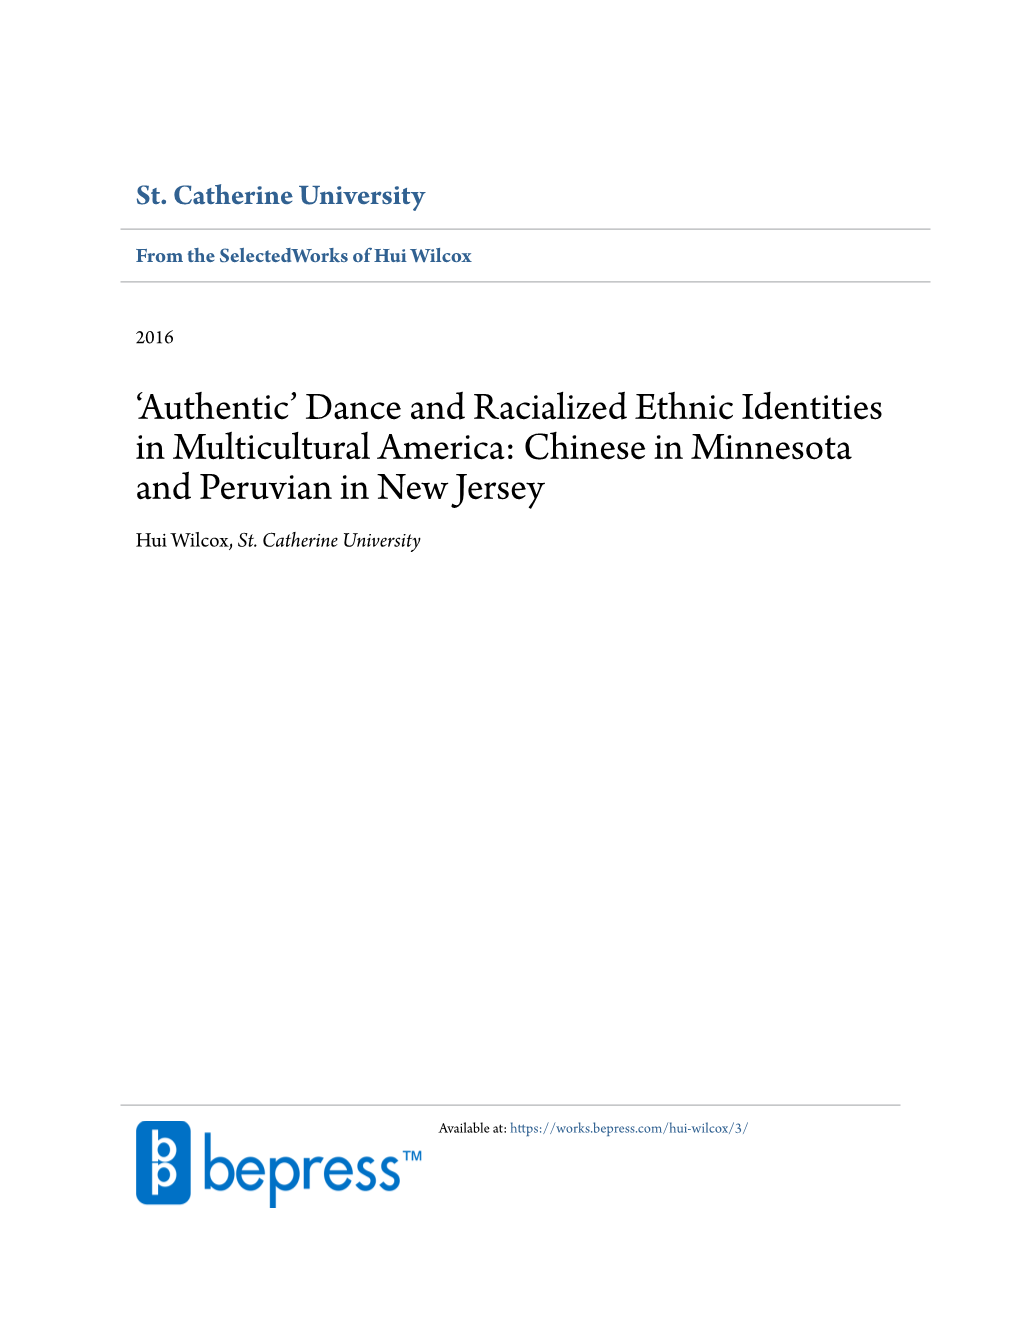 Dance and Racialized Ethnic Identities in Multicultural America: Chinese in Minnesota and Peruvian in New Jersey Hui Wilcox, St